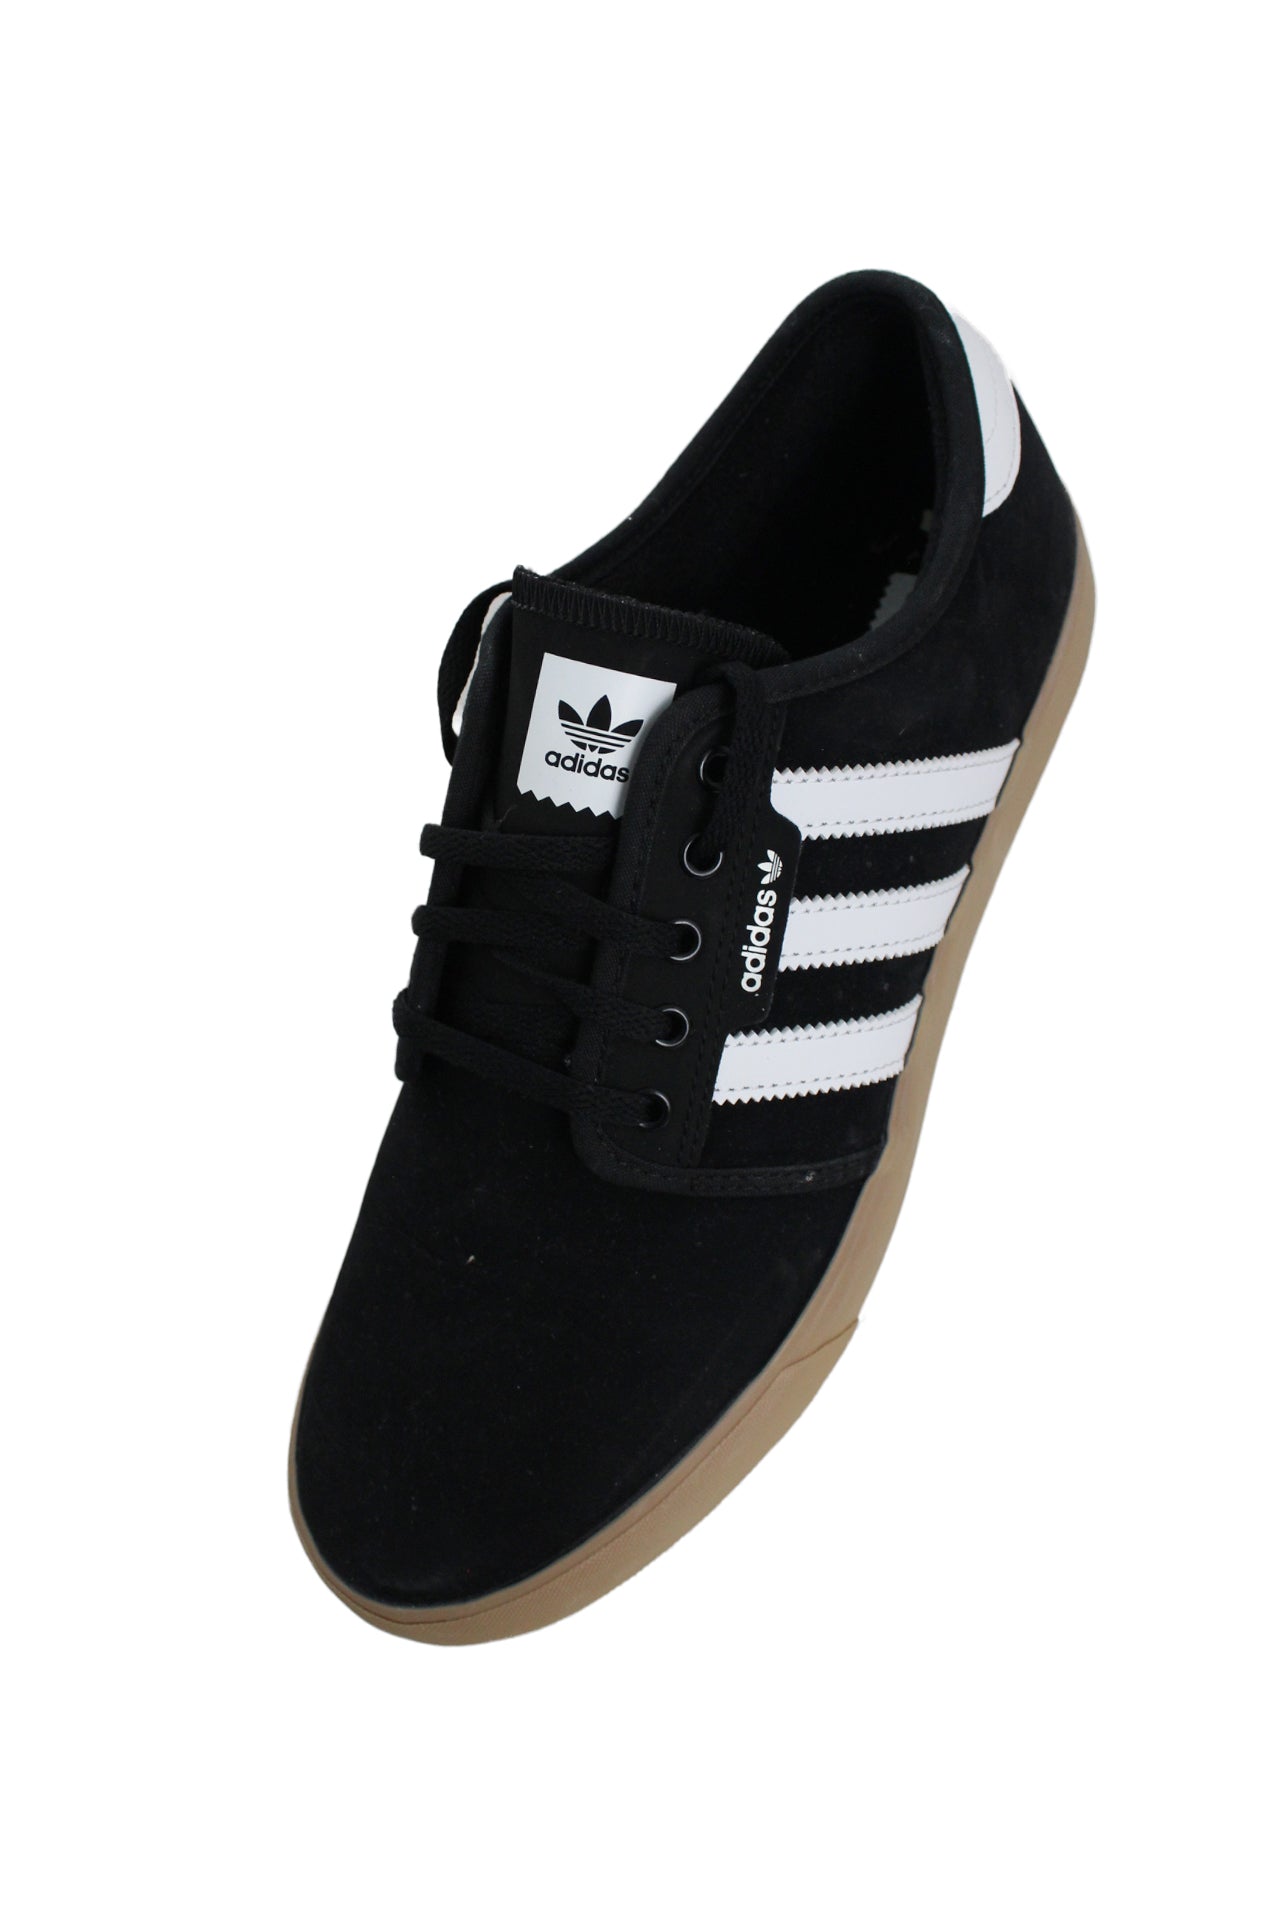 upper angle of adidas shoes. text 'adidas' on tongue and side wall. 